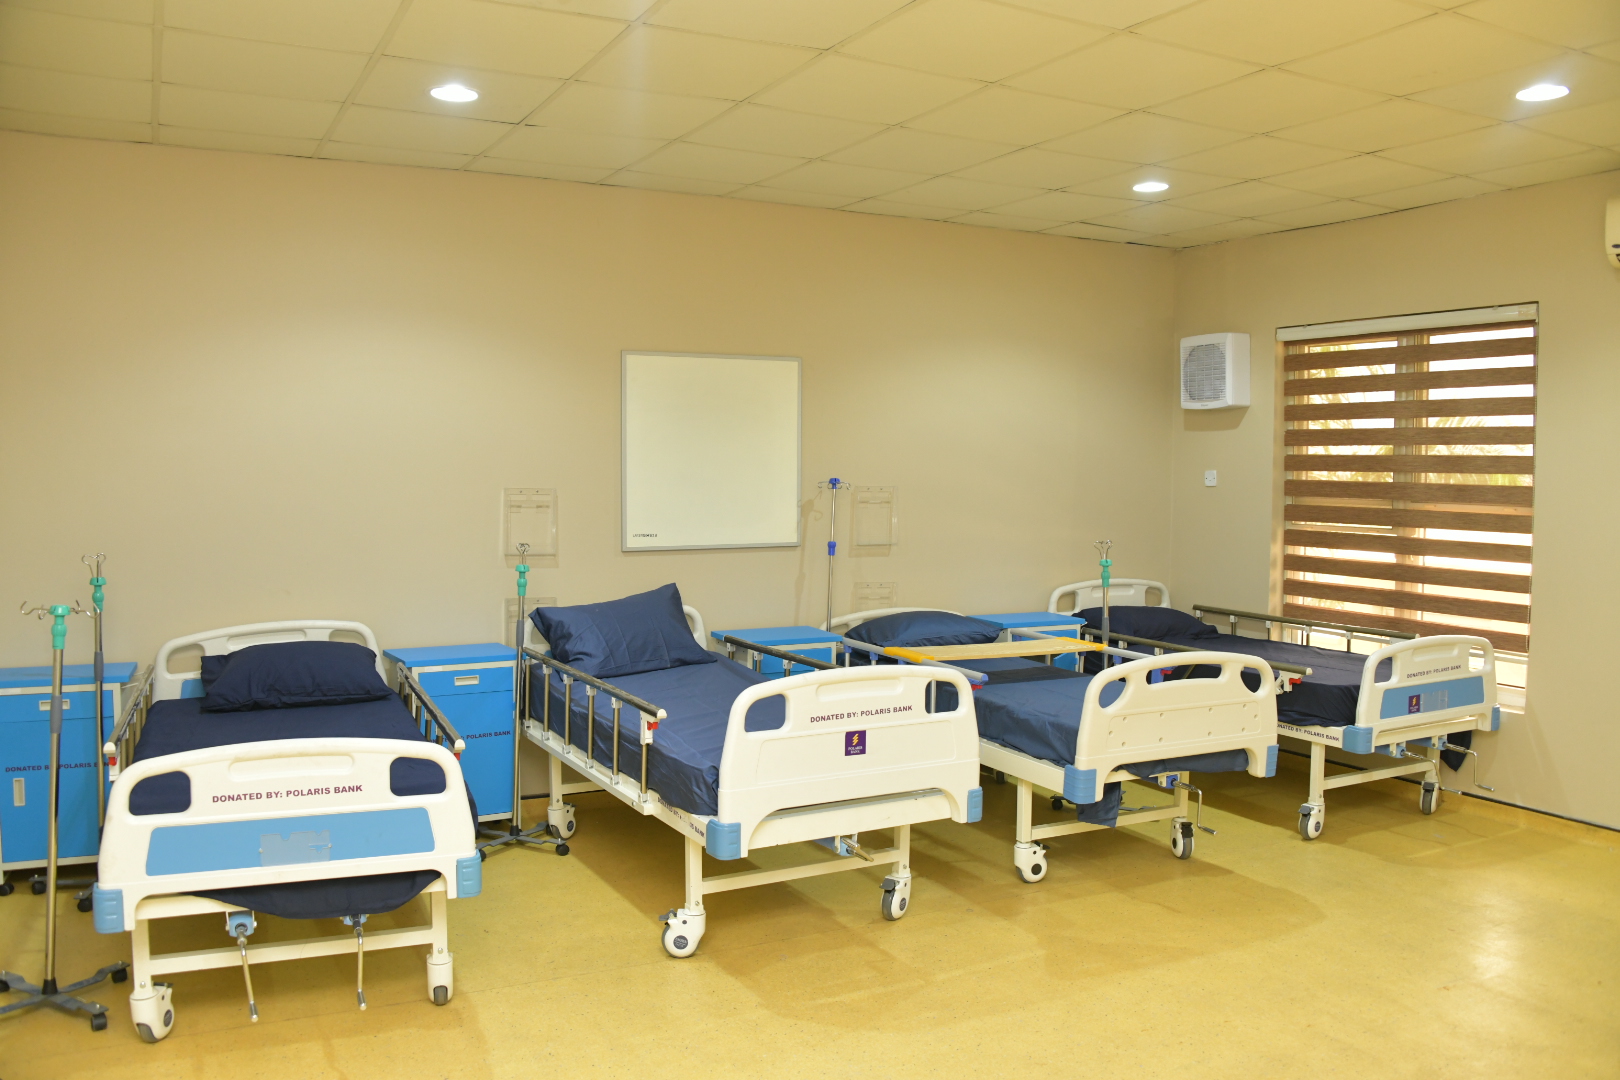 The Isolation Centre for Coronavirus treatment at the Gbagada General Hospital, unveiled by Governor Babajide Sanwo-Olu, on Friday, May 1, 2020.